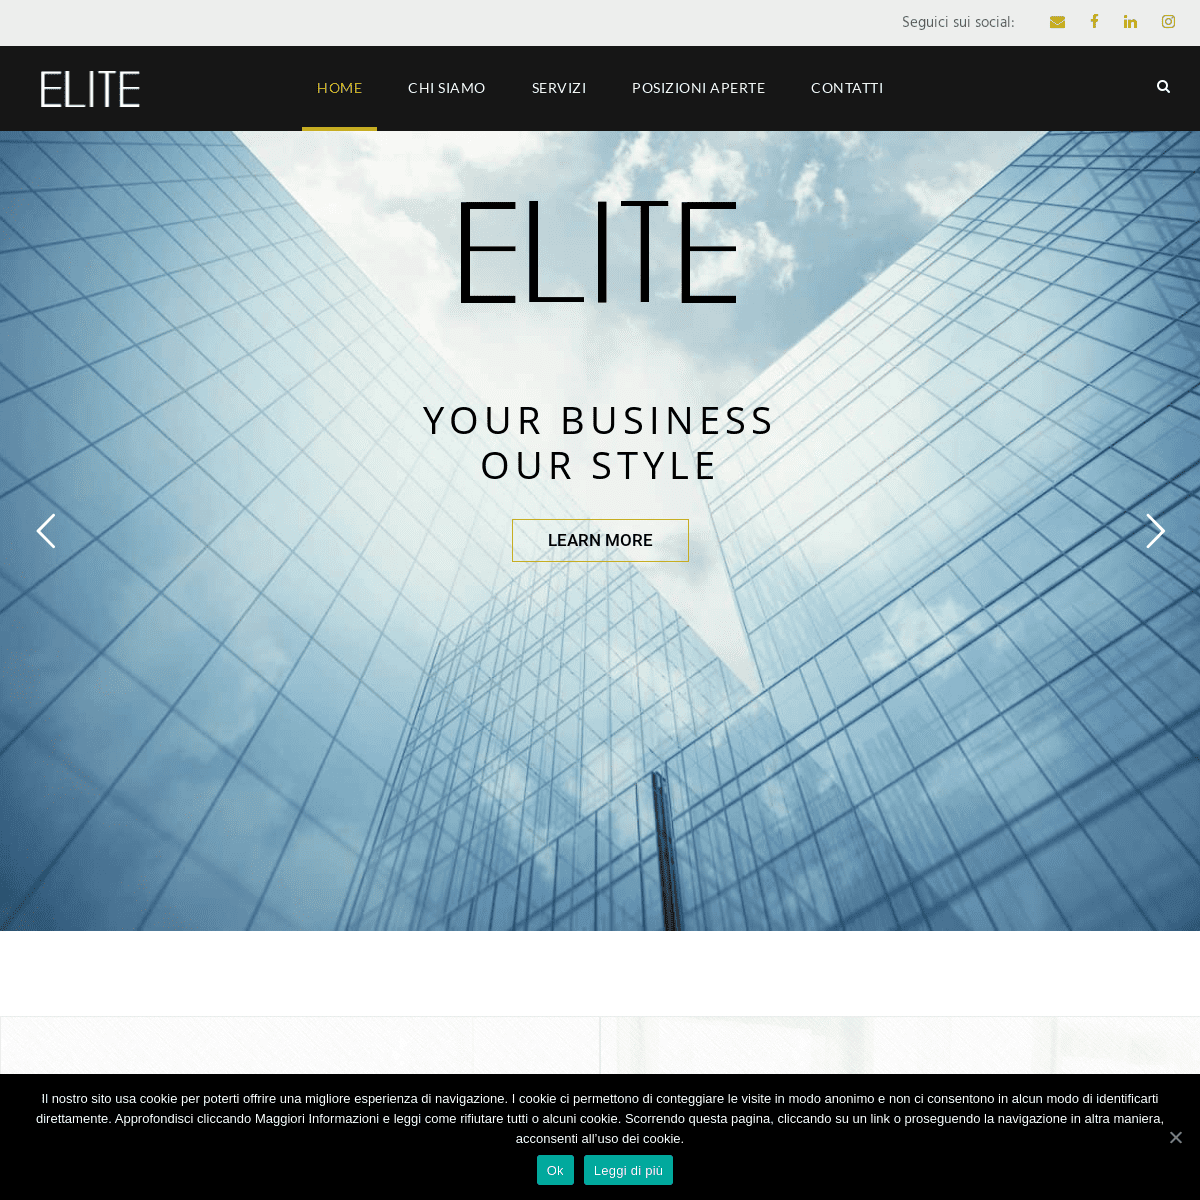 A complete backup of https://elitexecutive.it